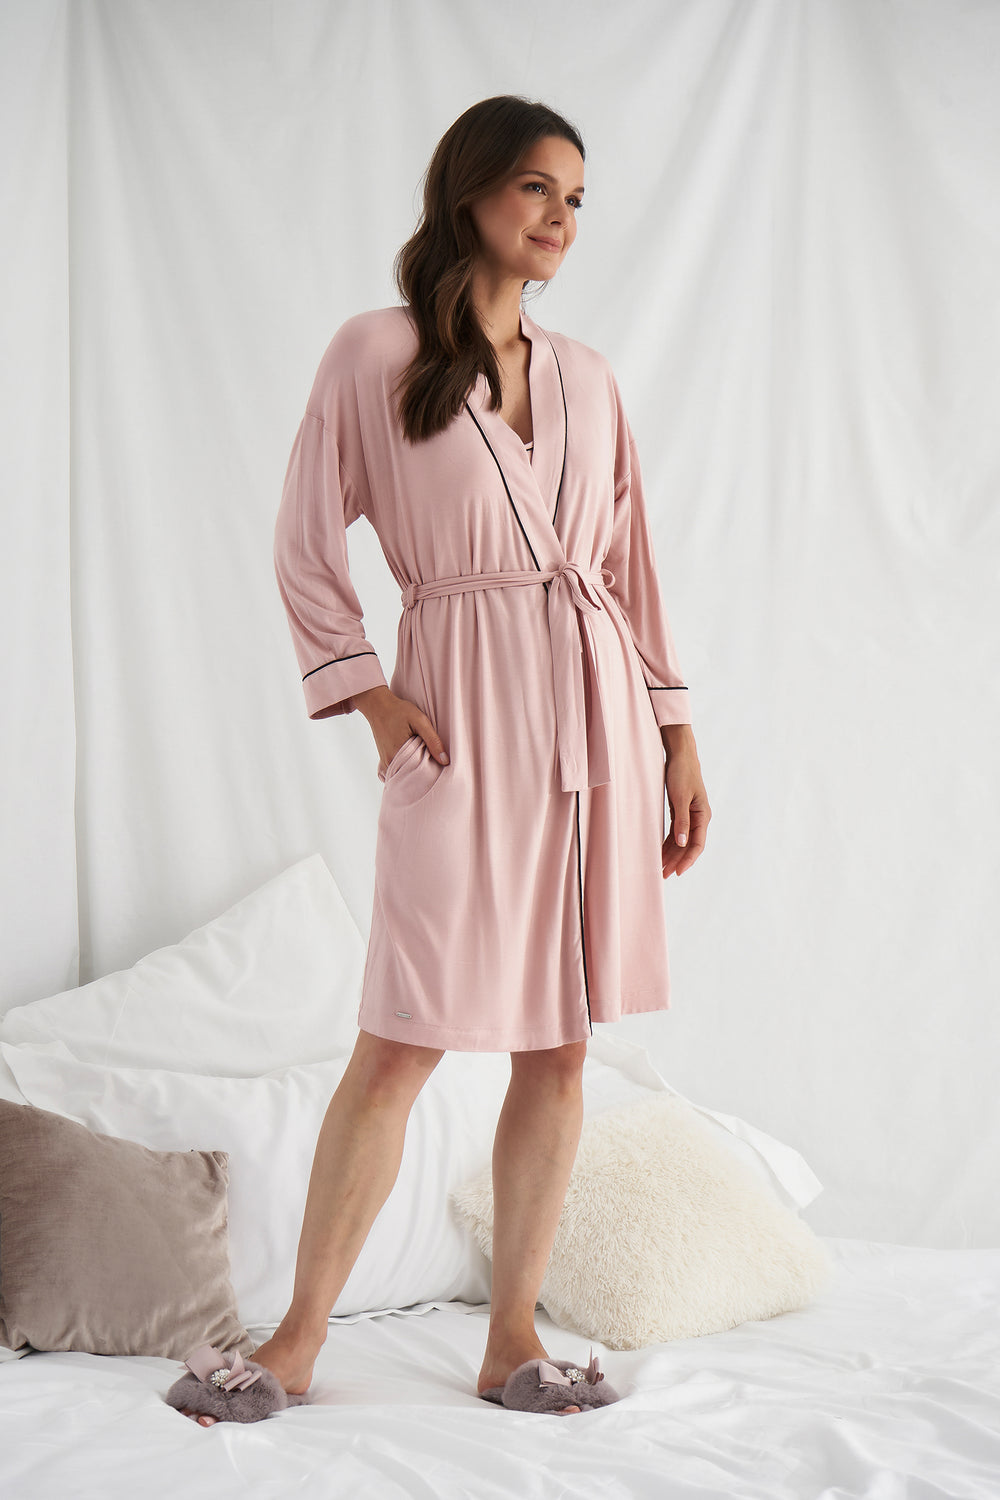 Women's Bamboo Kimono Robe in Pink with functional tie and deep pockets from Pretty You London